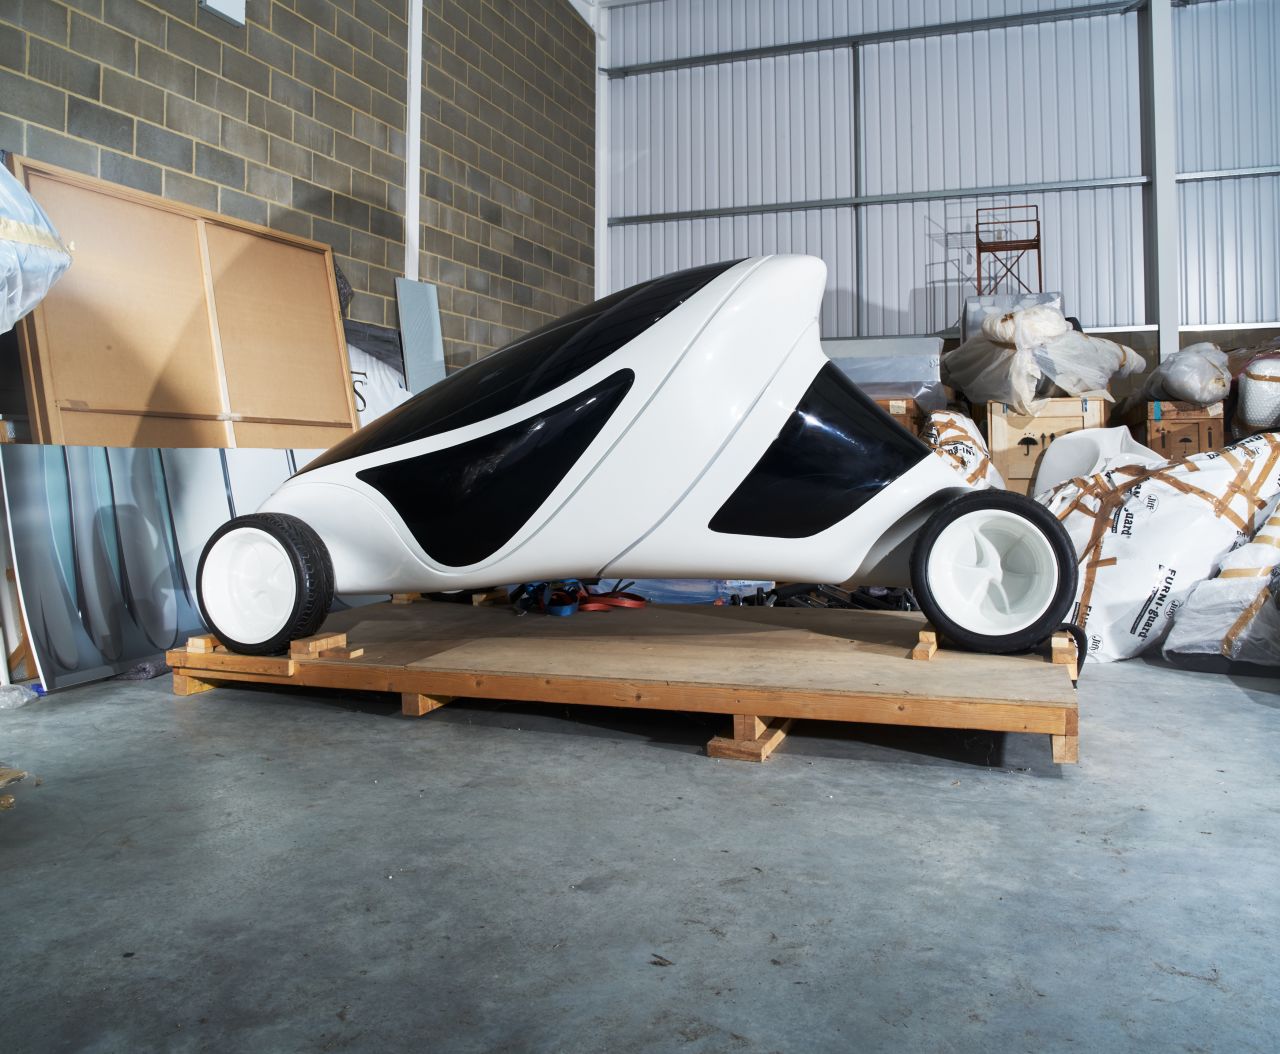 In 2005 Schachter collaborated with architect Zaha Hadid on the Z-Car. She also worked on the Z-boat with him in 2012.